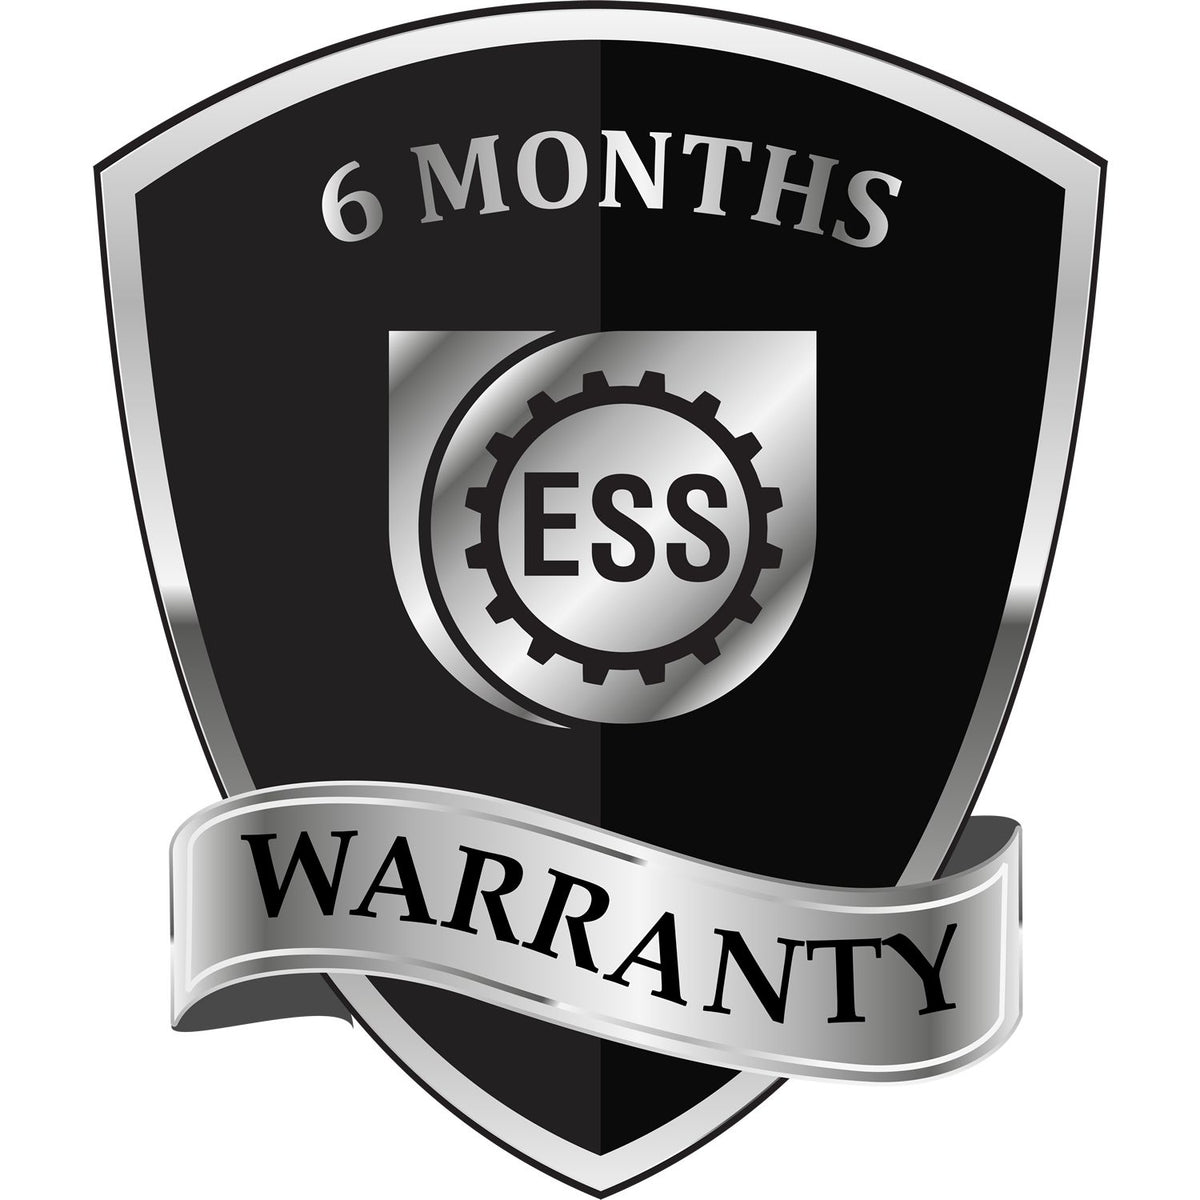 Large Savings Cds Rubber Stamp 4574R 6 Month Warranty